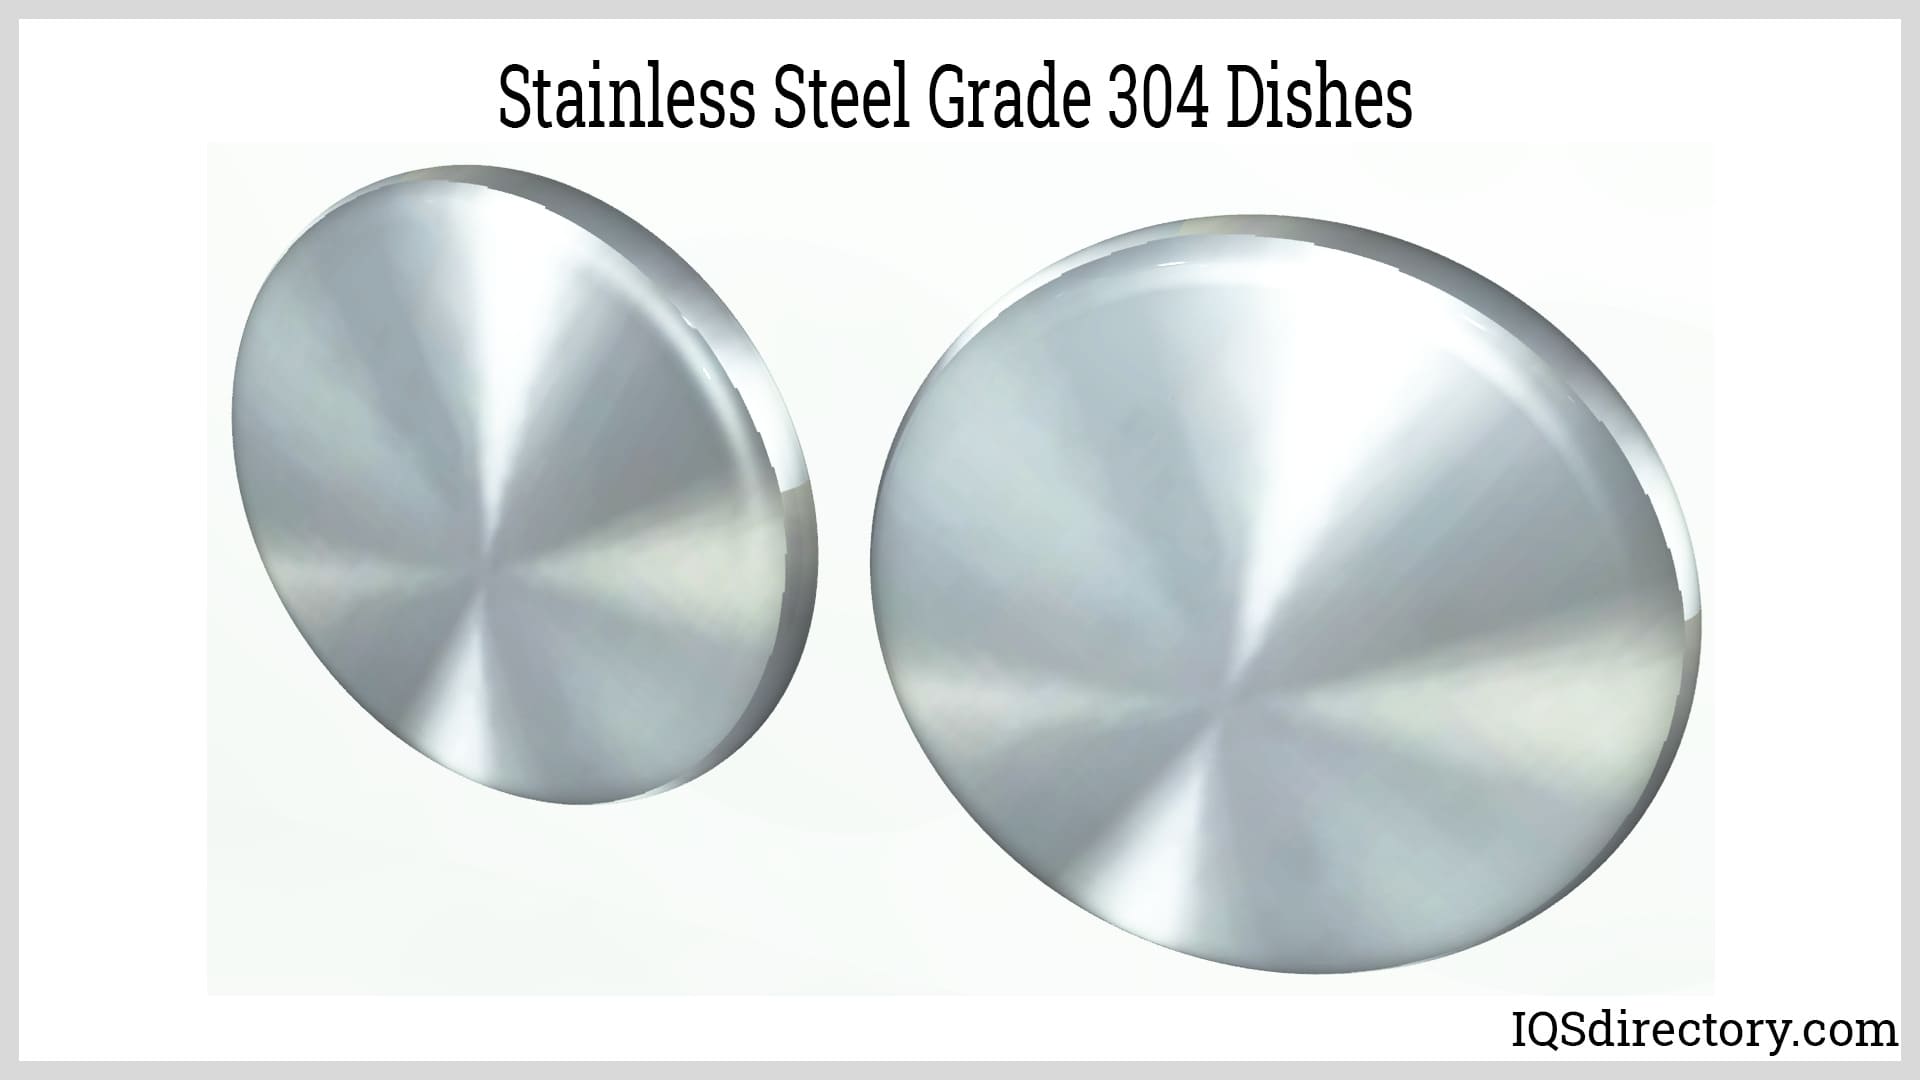 Stainless Steel Grade 304 Dishes